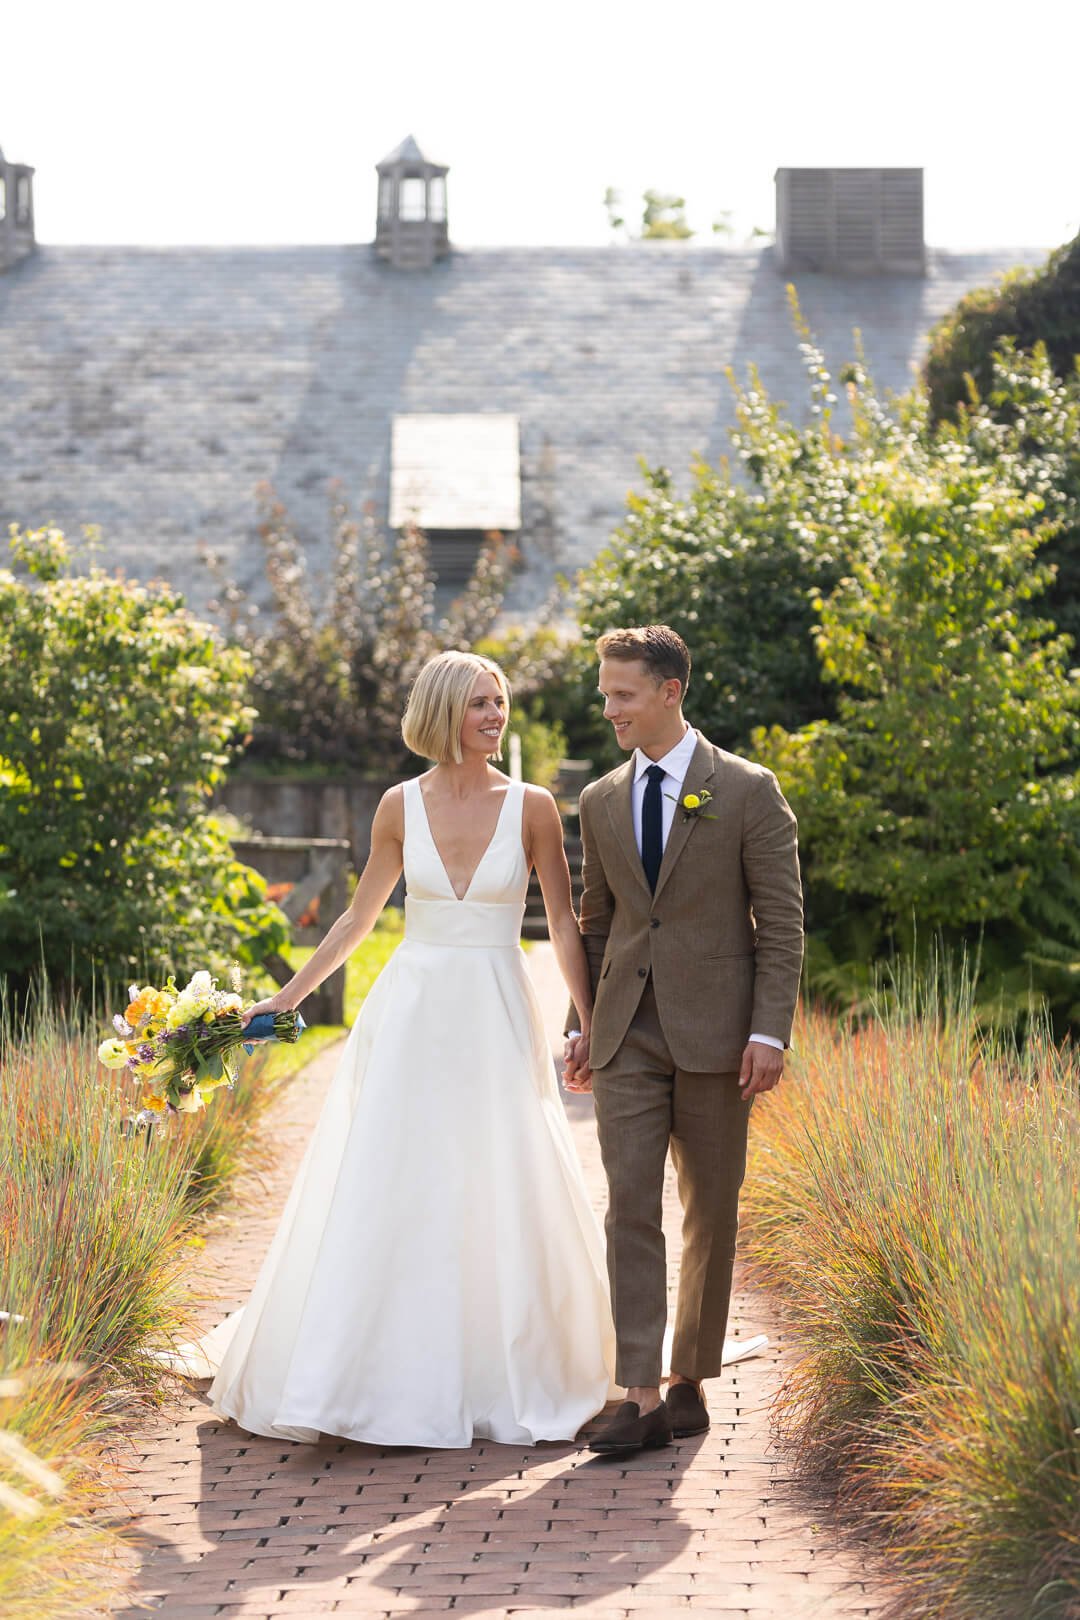 Couple walks hand-in-hand through a serene garden, reflecting a peaceful and natural wedding setting.